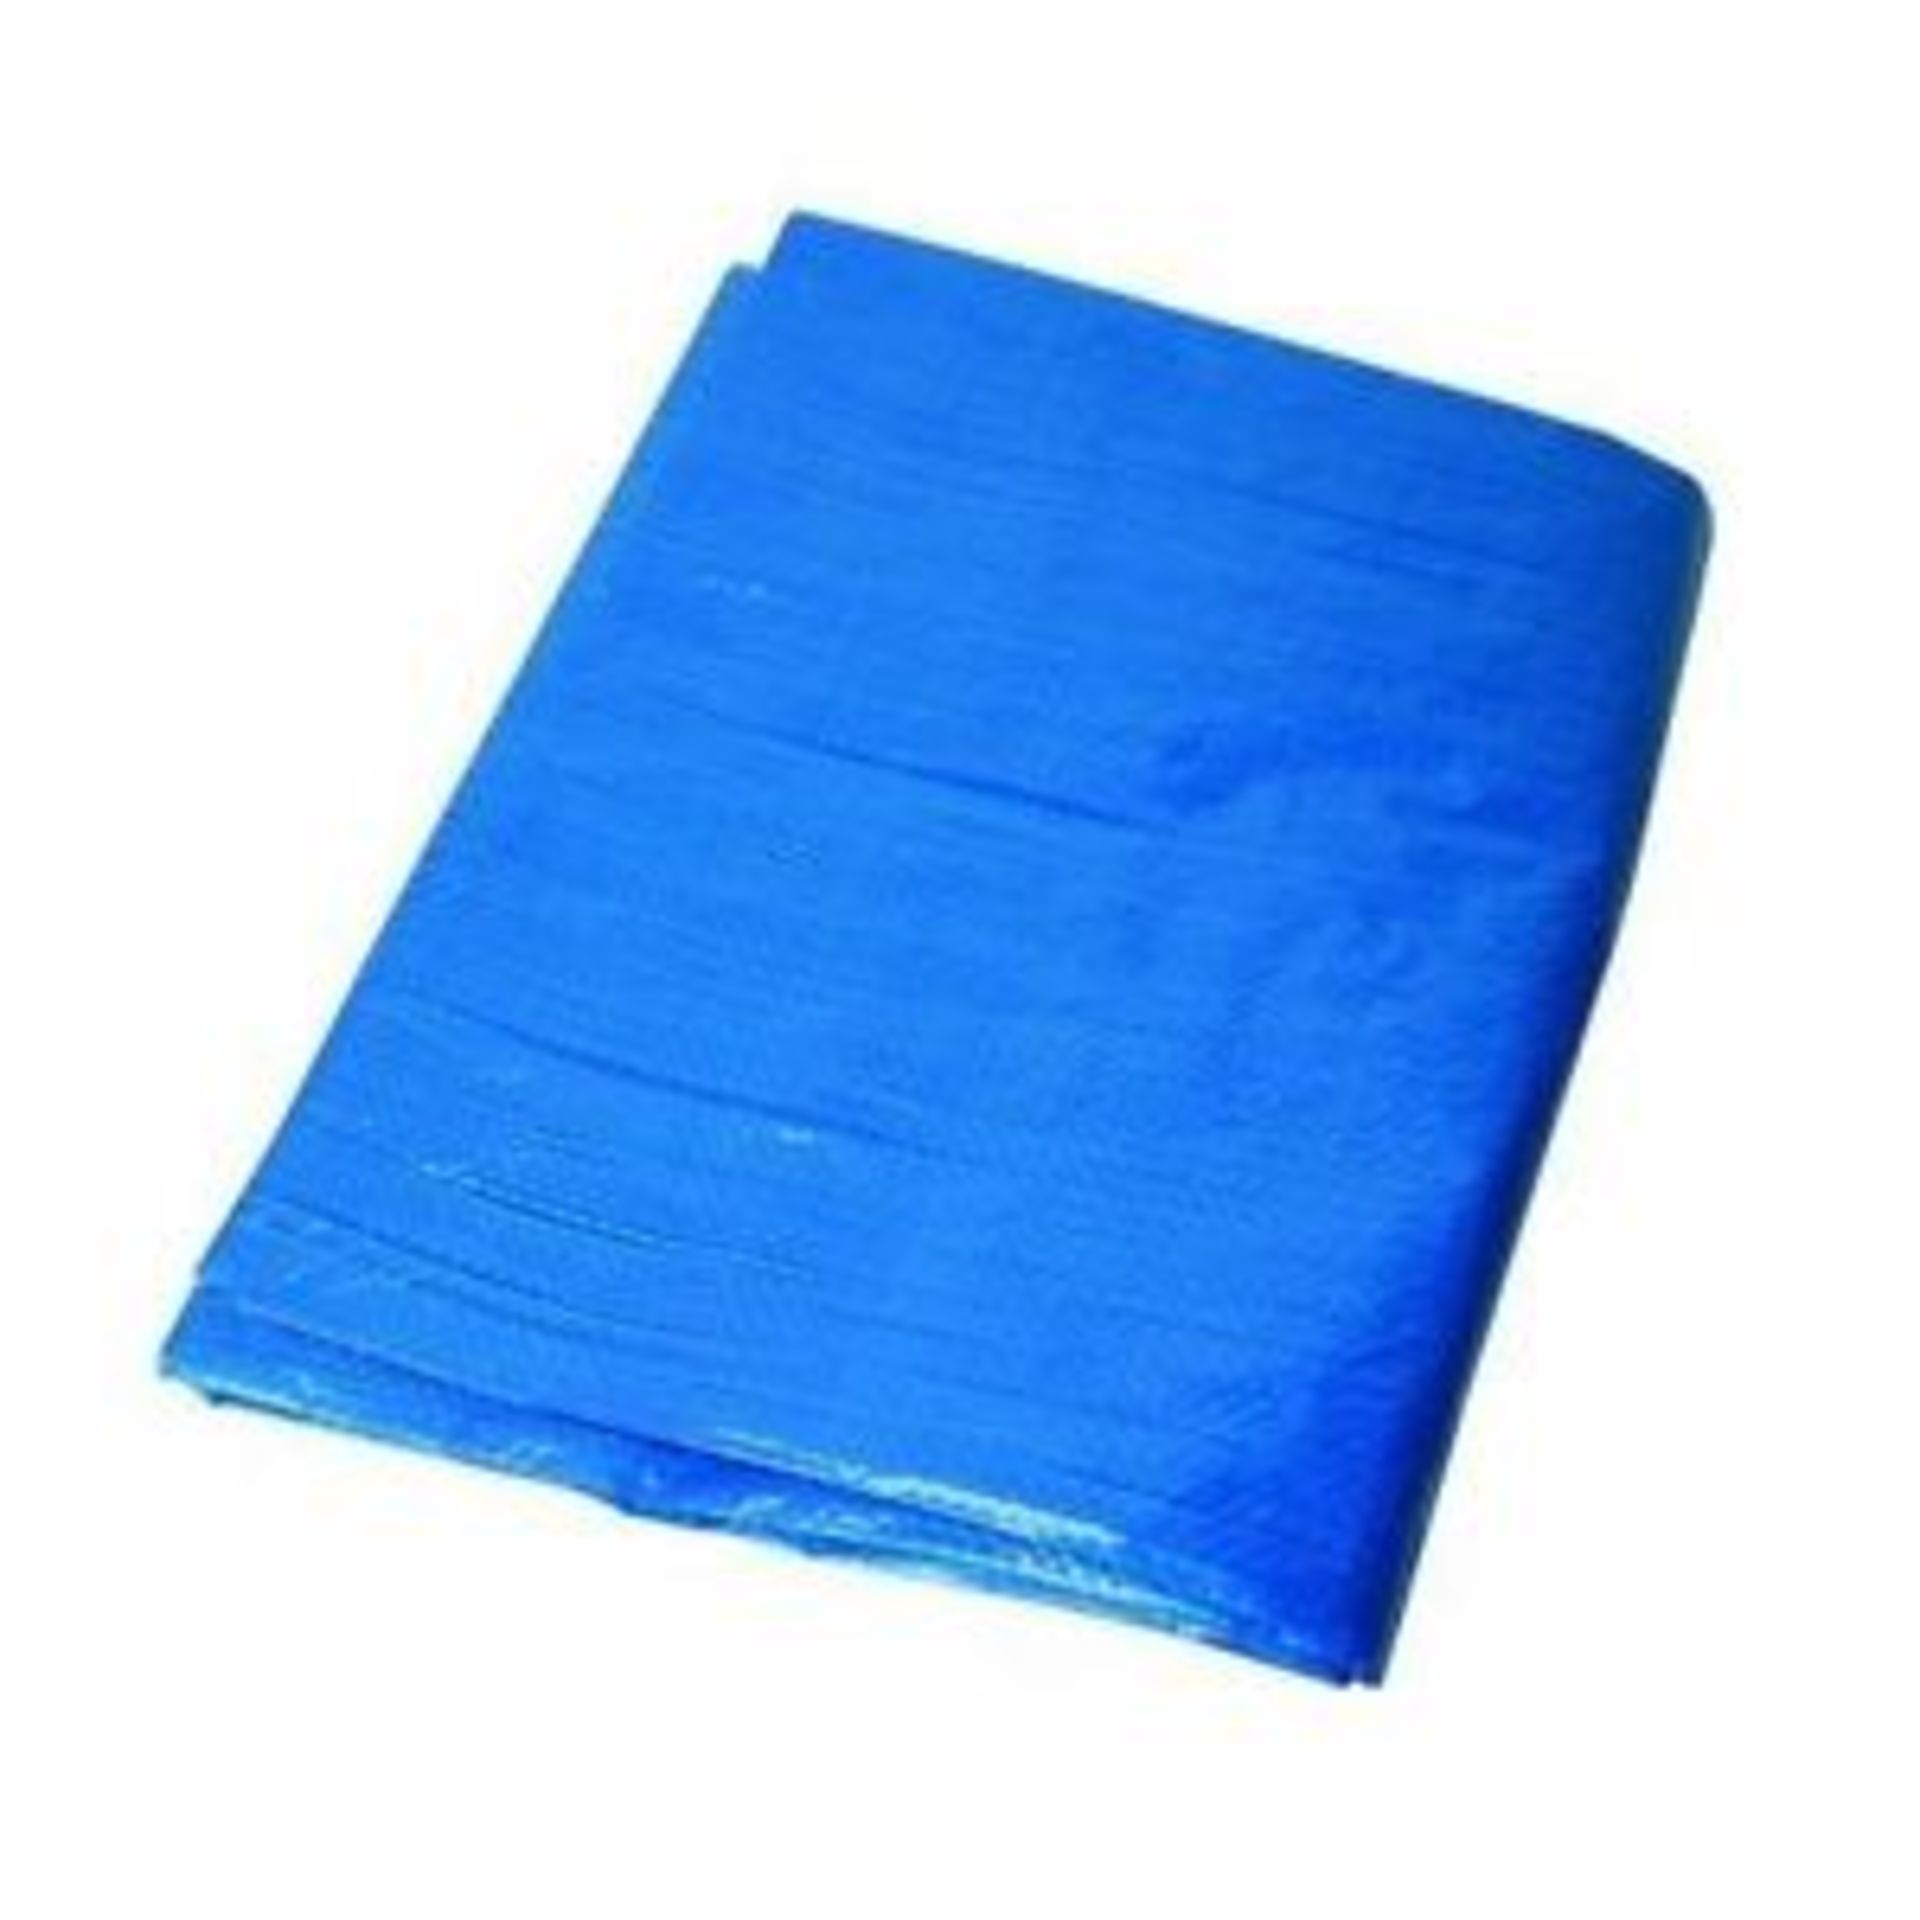 V *TRADE QTY* Brand New 12 x 8ft Blue Tarpaulin X 8 YOUR BID PRICE TO BE MULTIPLIED BY EIGHT